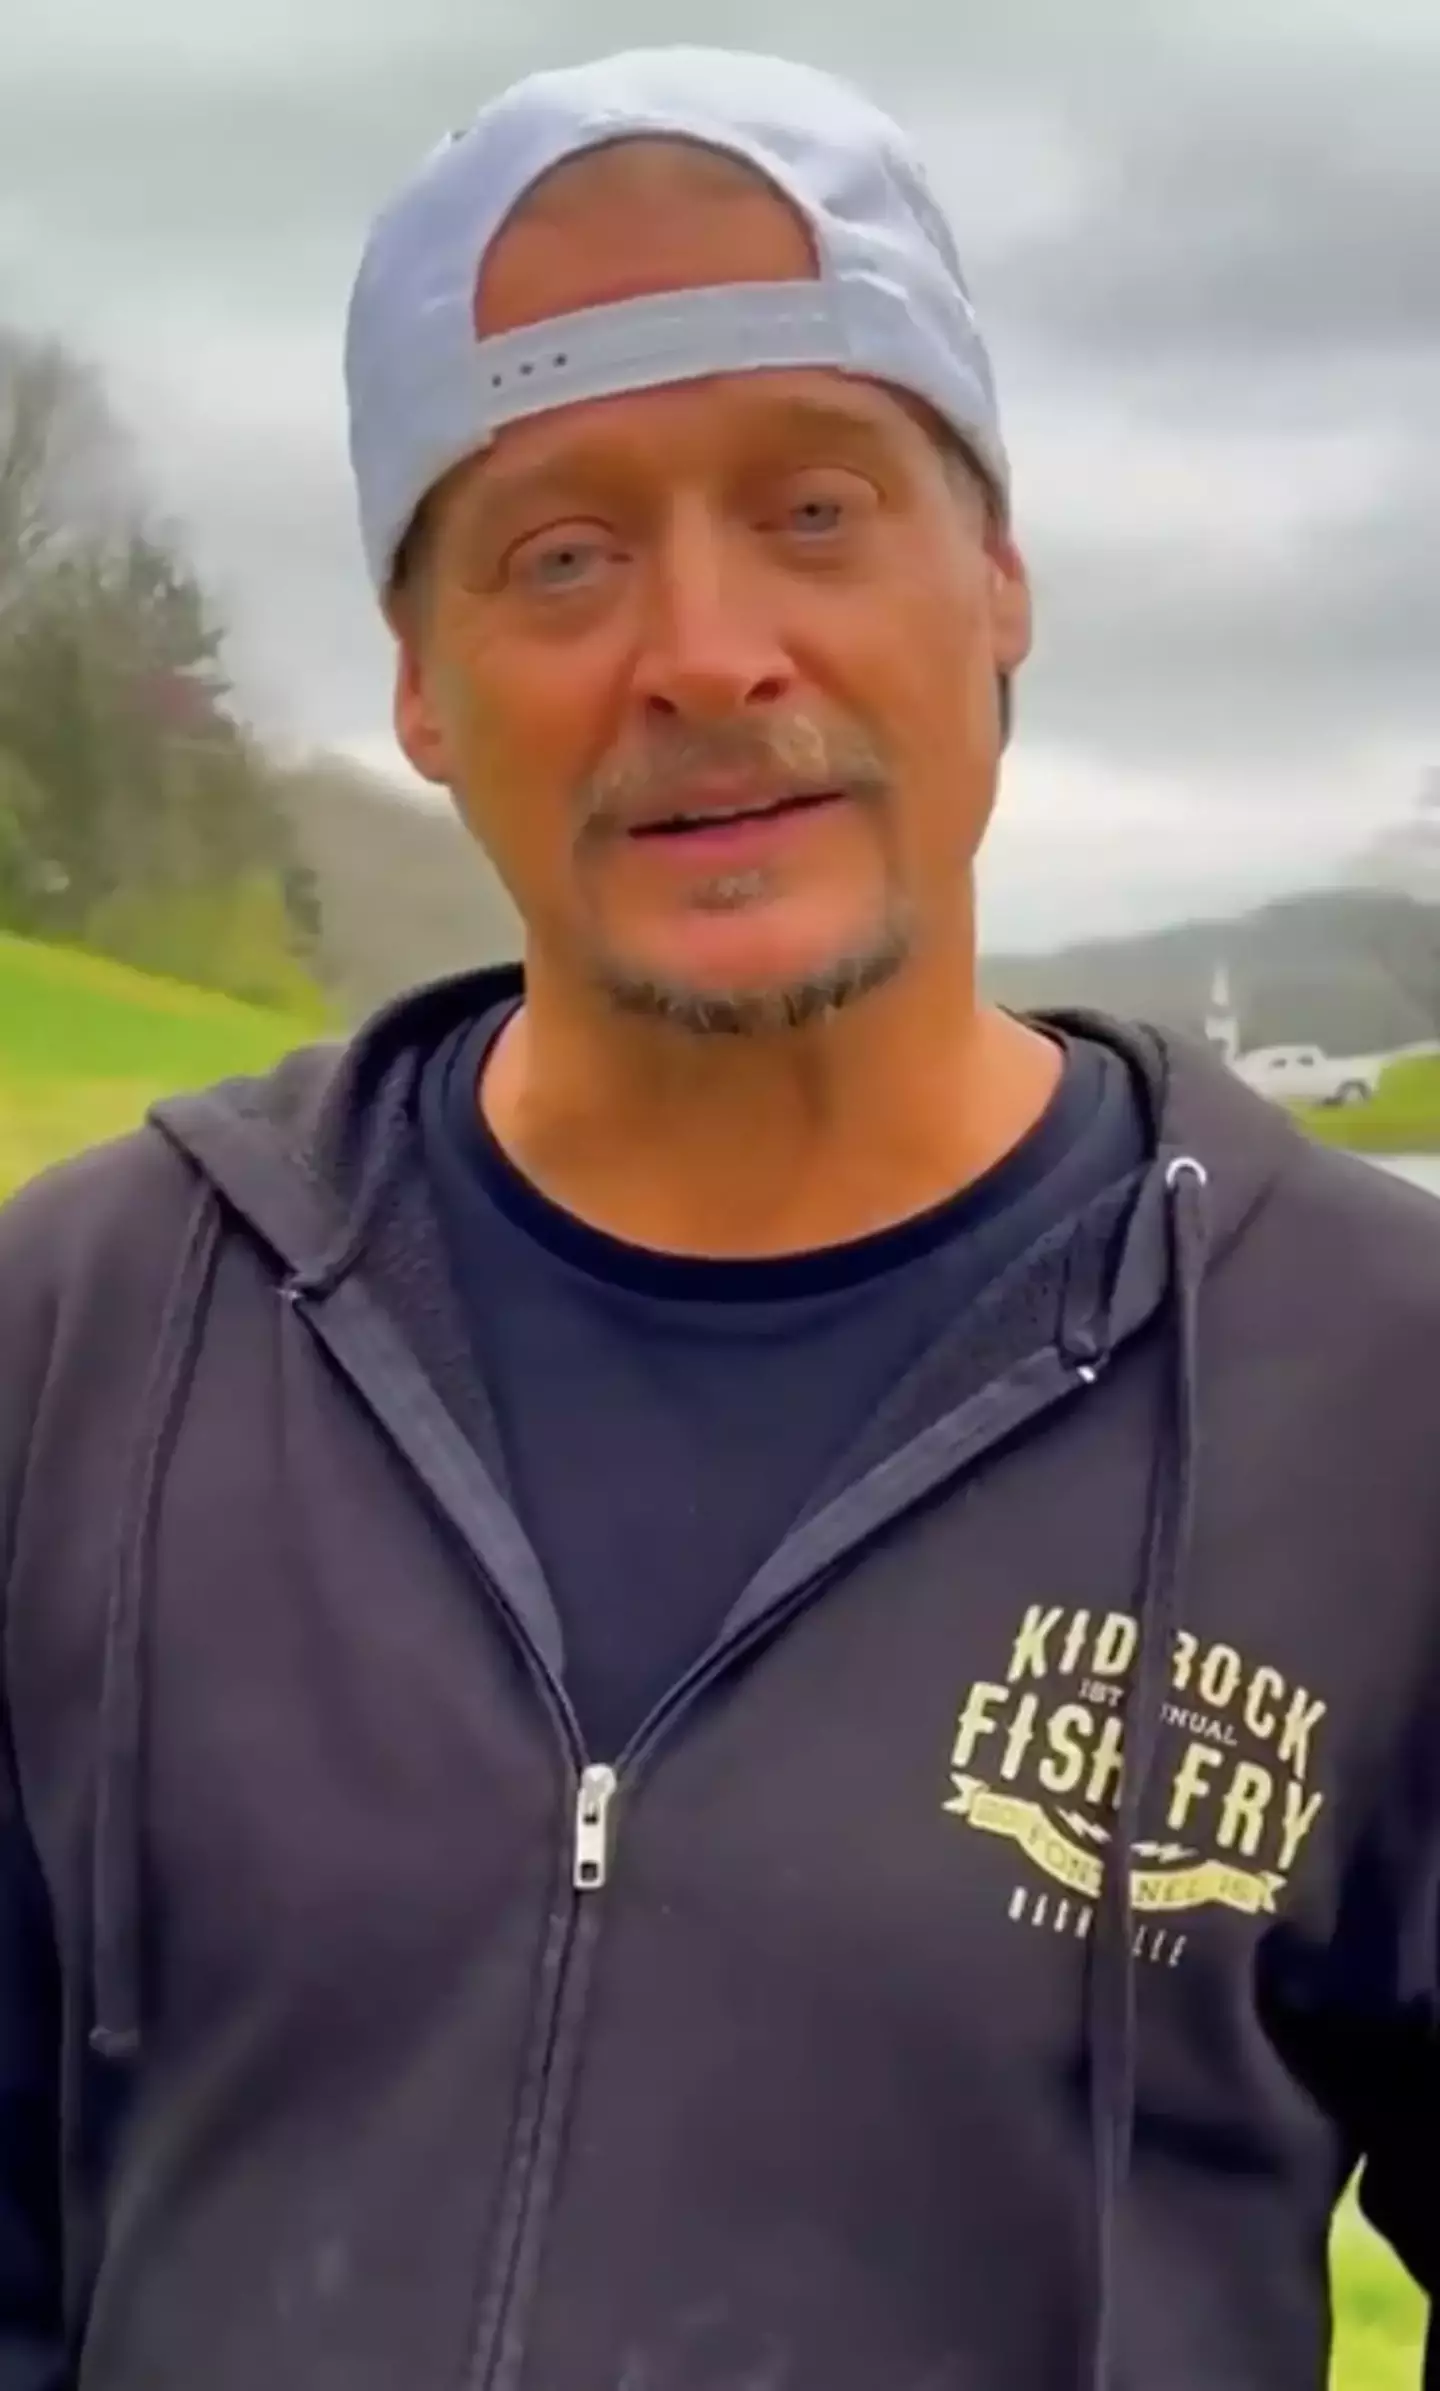 Kid Rock's face when he realises karma doesn't deal kindly with transphobes.